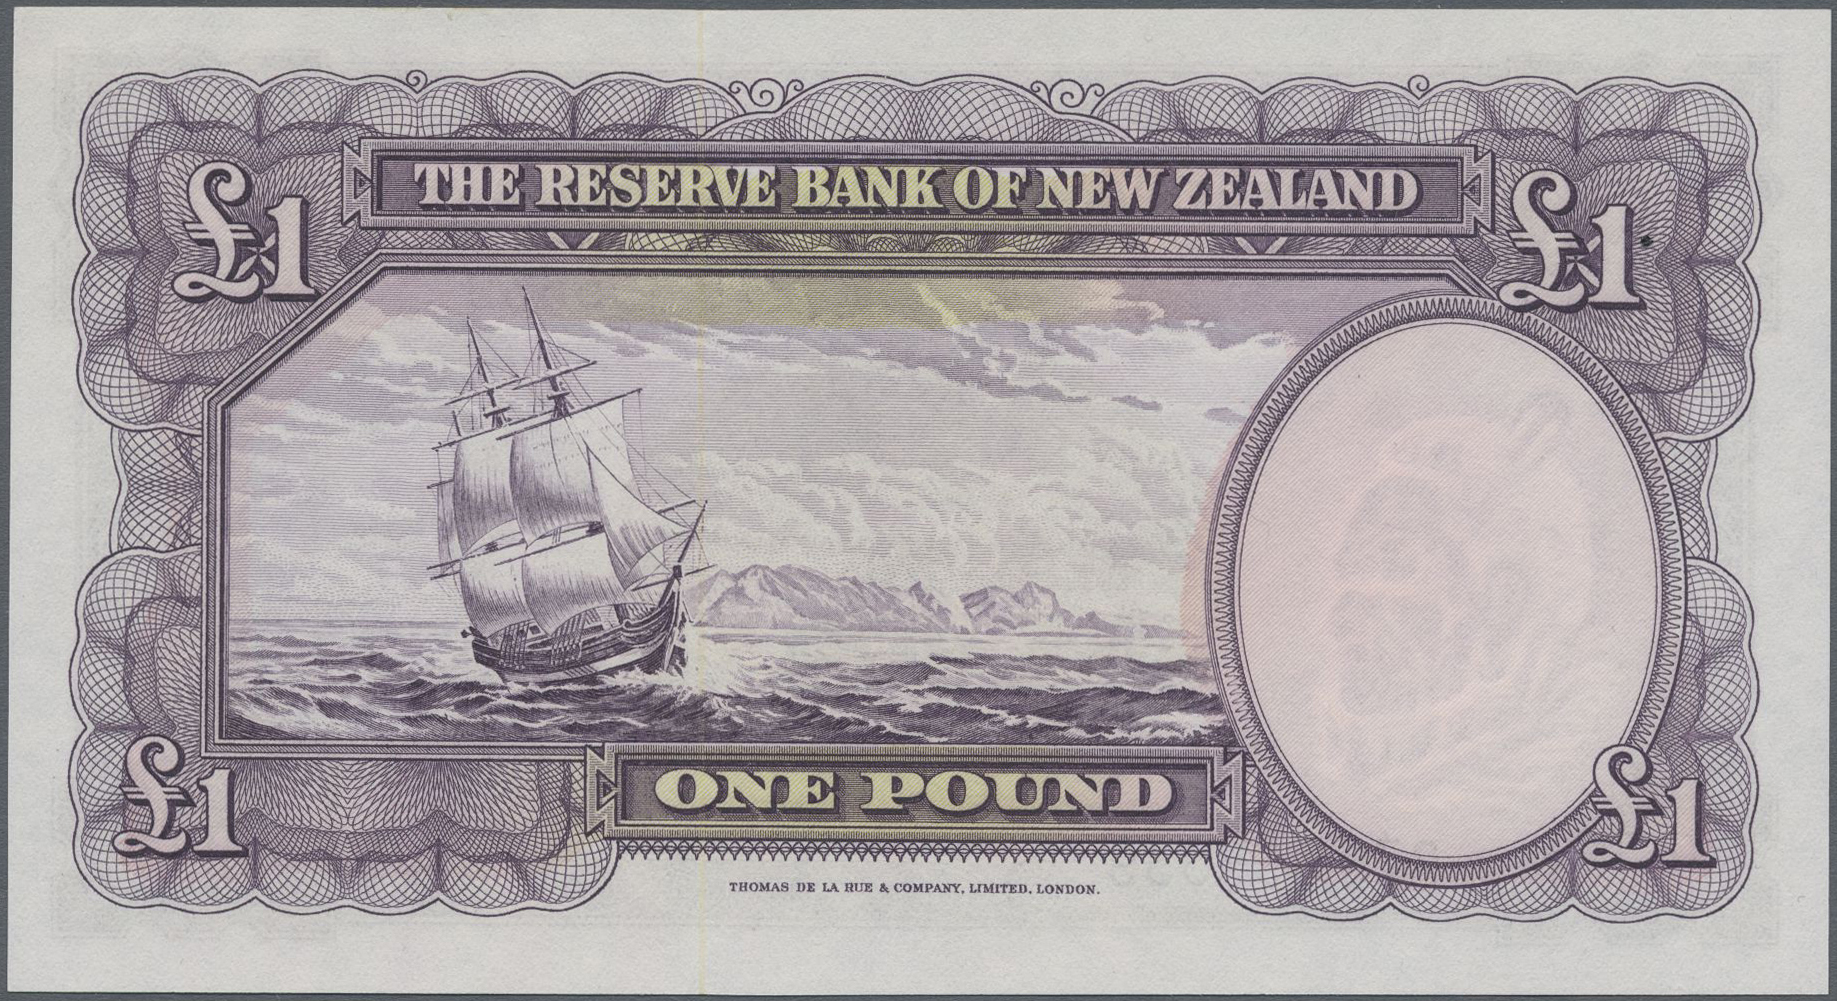 Lot 00347 - New Zealand / Neuseeland | Banknoten  -  Auktionshaus Christoph Gärtner GmbH & Co. KG 55th AUCTION - Day 1